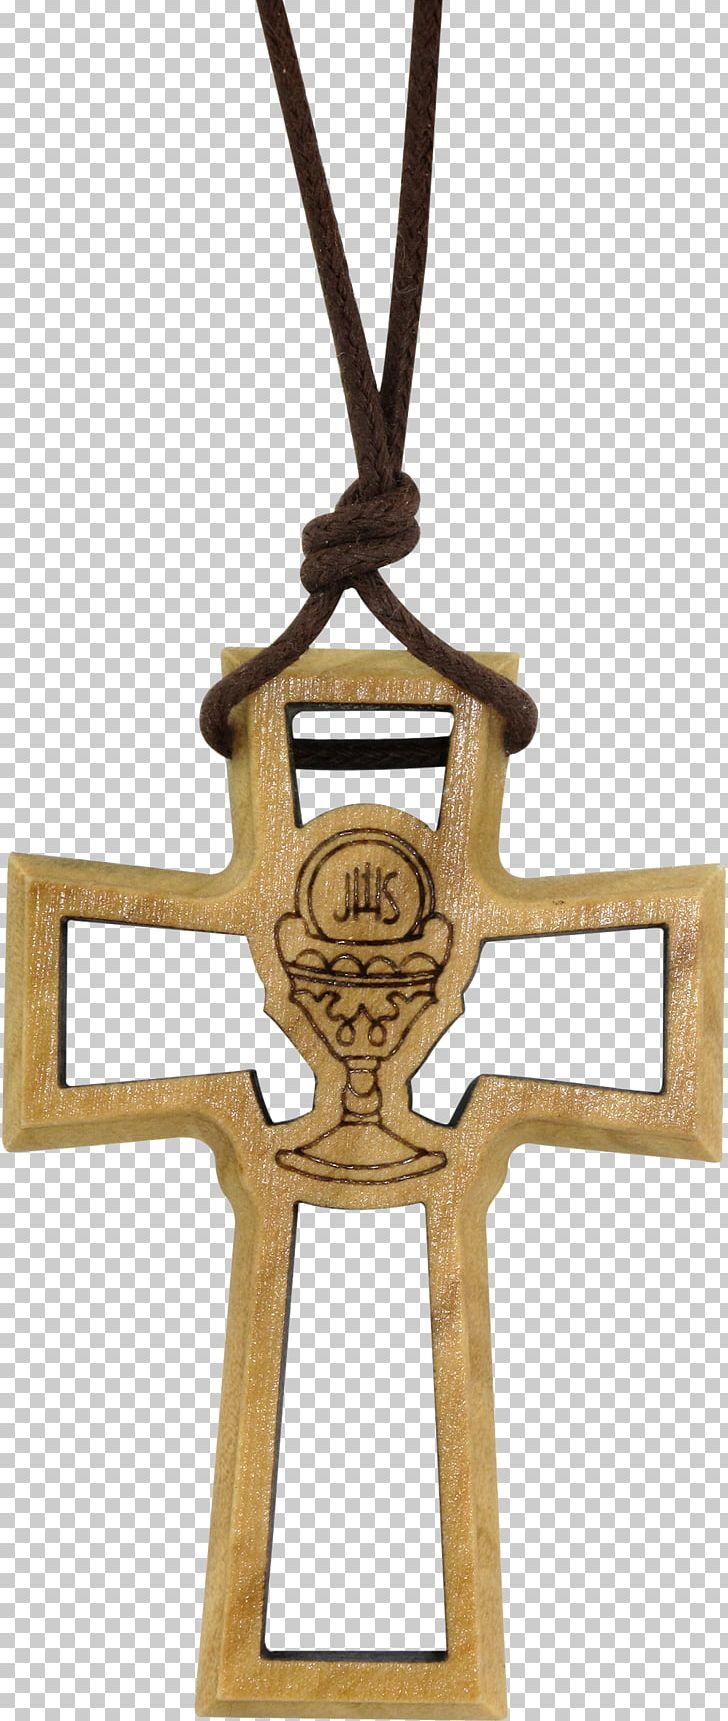 Crucifix Catholic Devotions Olive First Communion Eucharist PNG, Clipart, Brass, Catechism, Catholic Devotions, Christian Cross, Christianity Free PNG Download